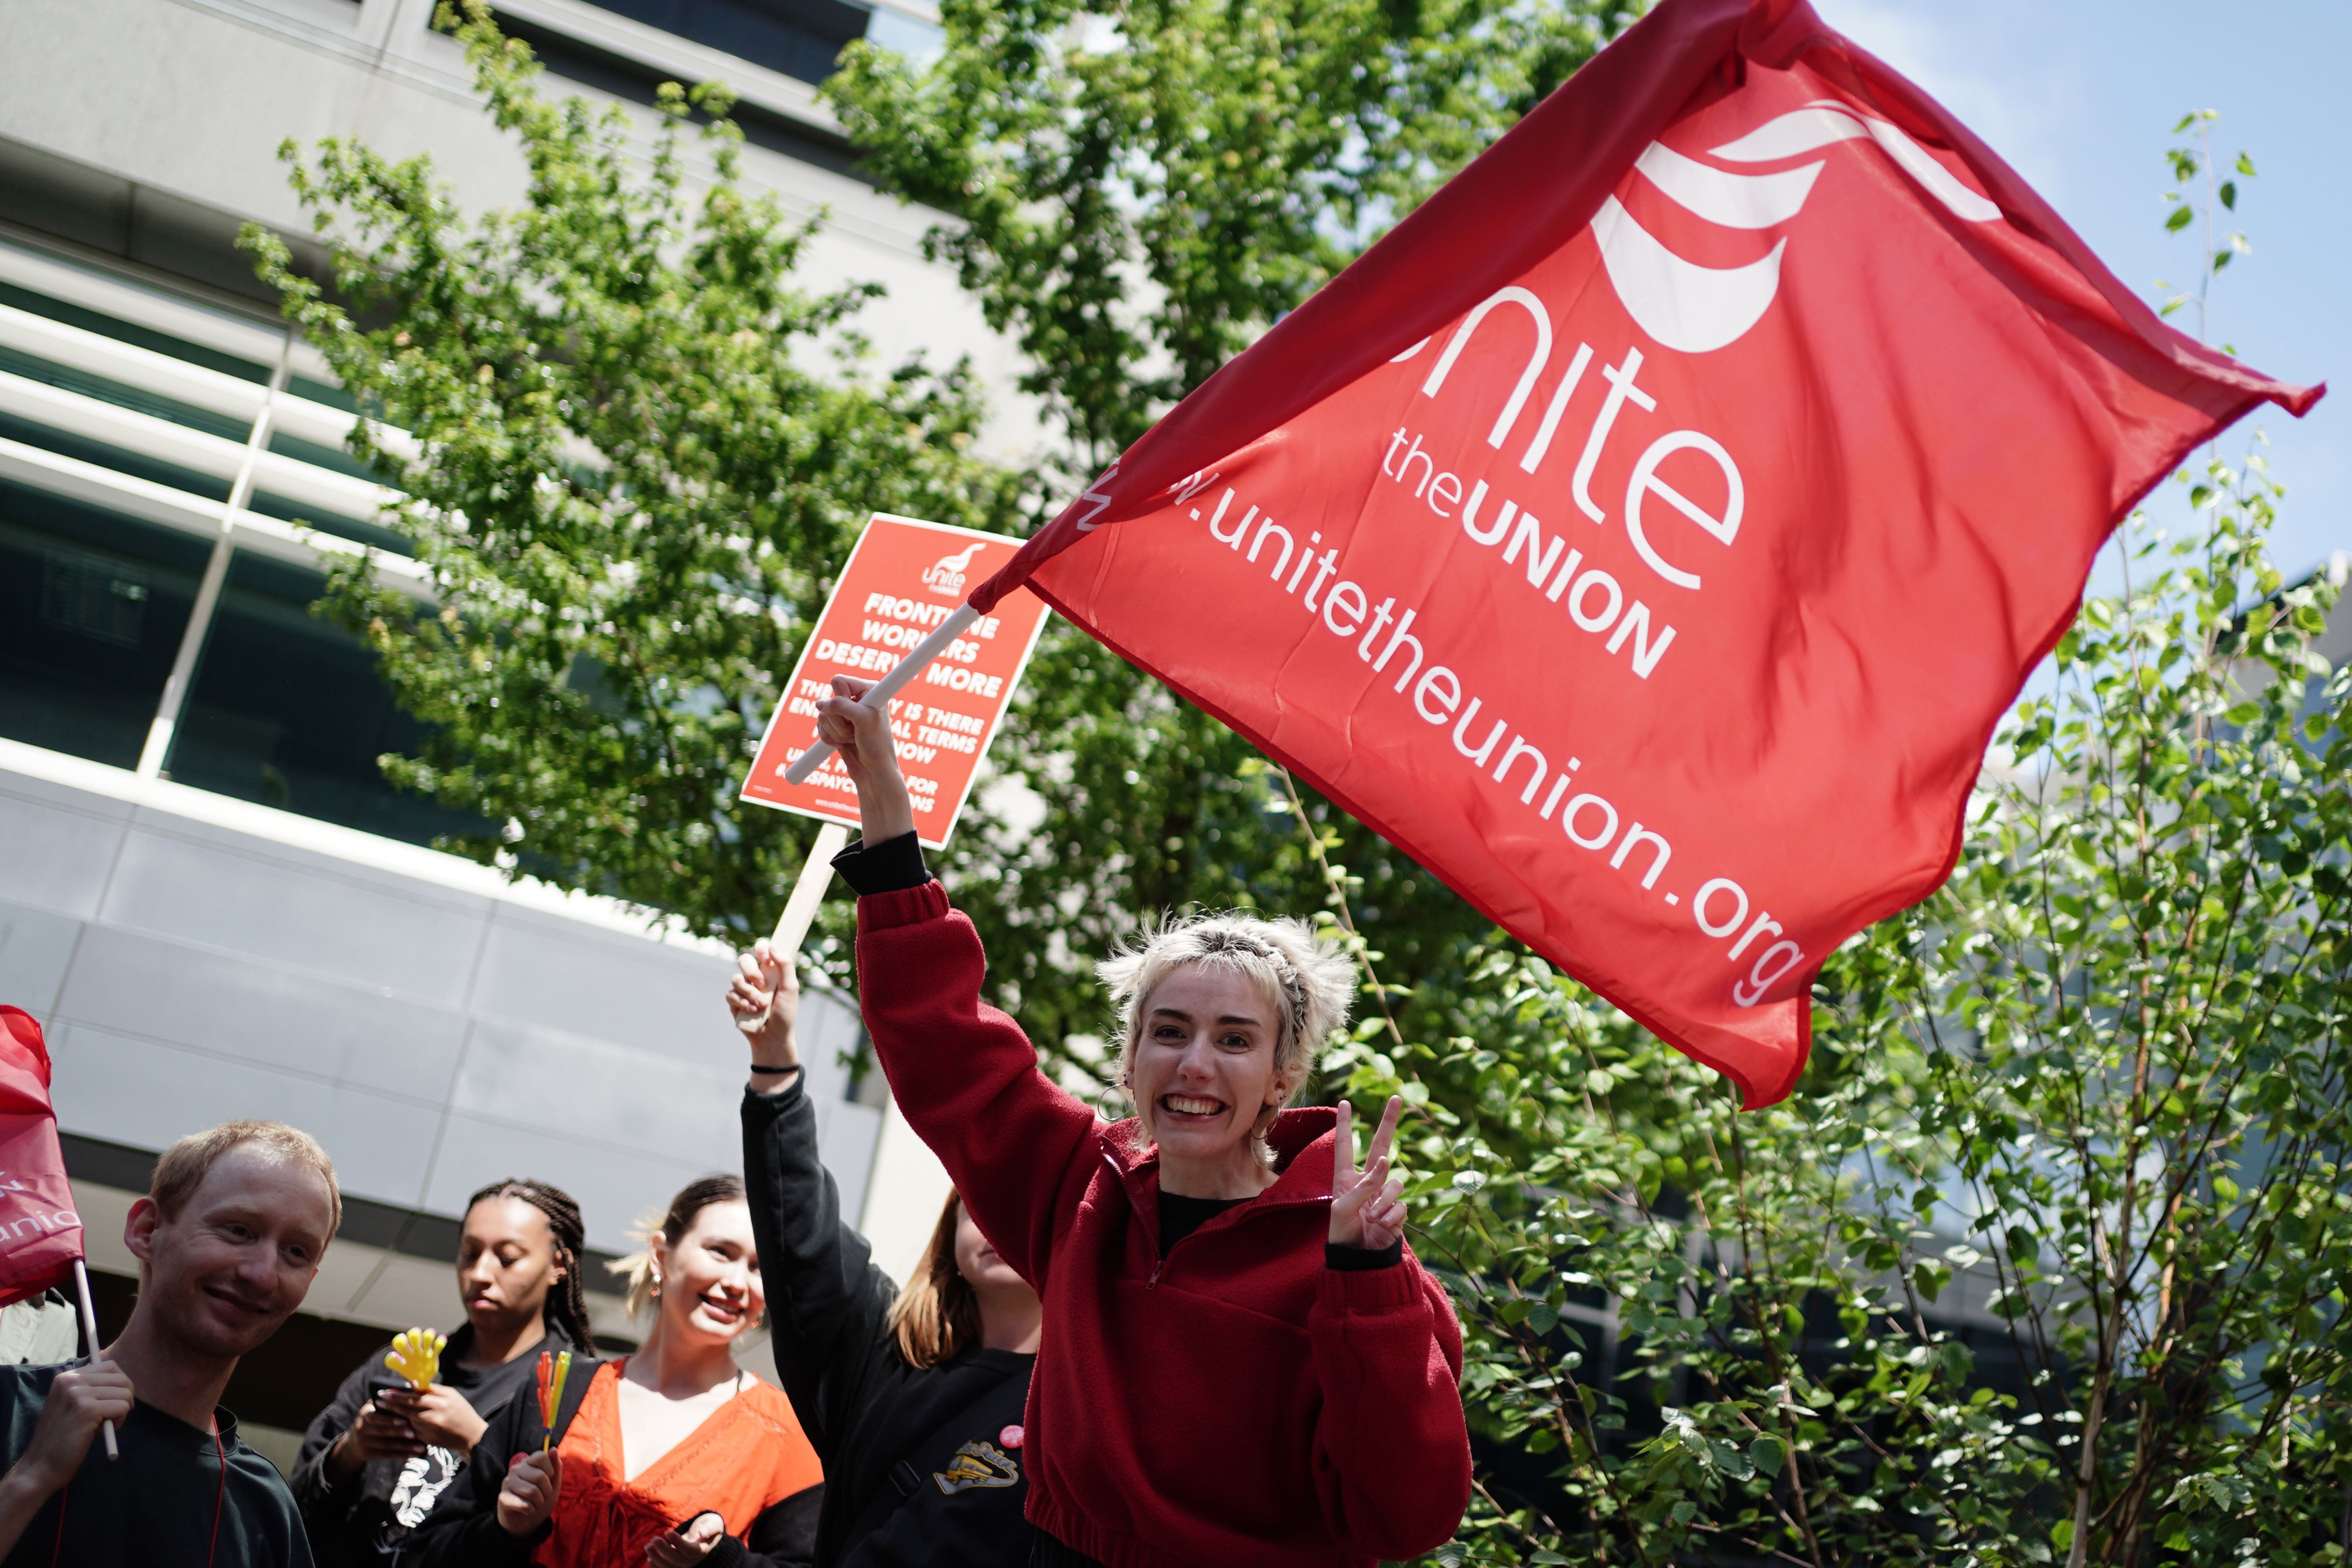 St Mungo’s workers protesting outside the homelessness charity’s headquarters in Tower Hill, London, in May as they began a strike over pay (Jordan Pettitt/PA)